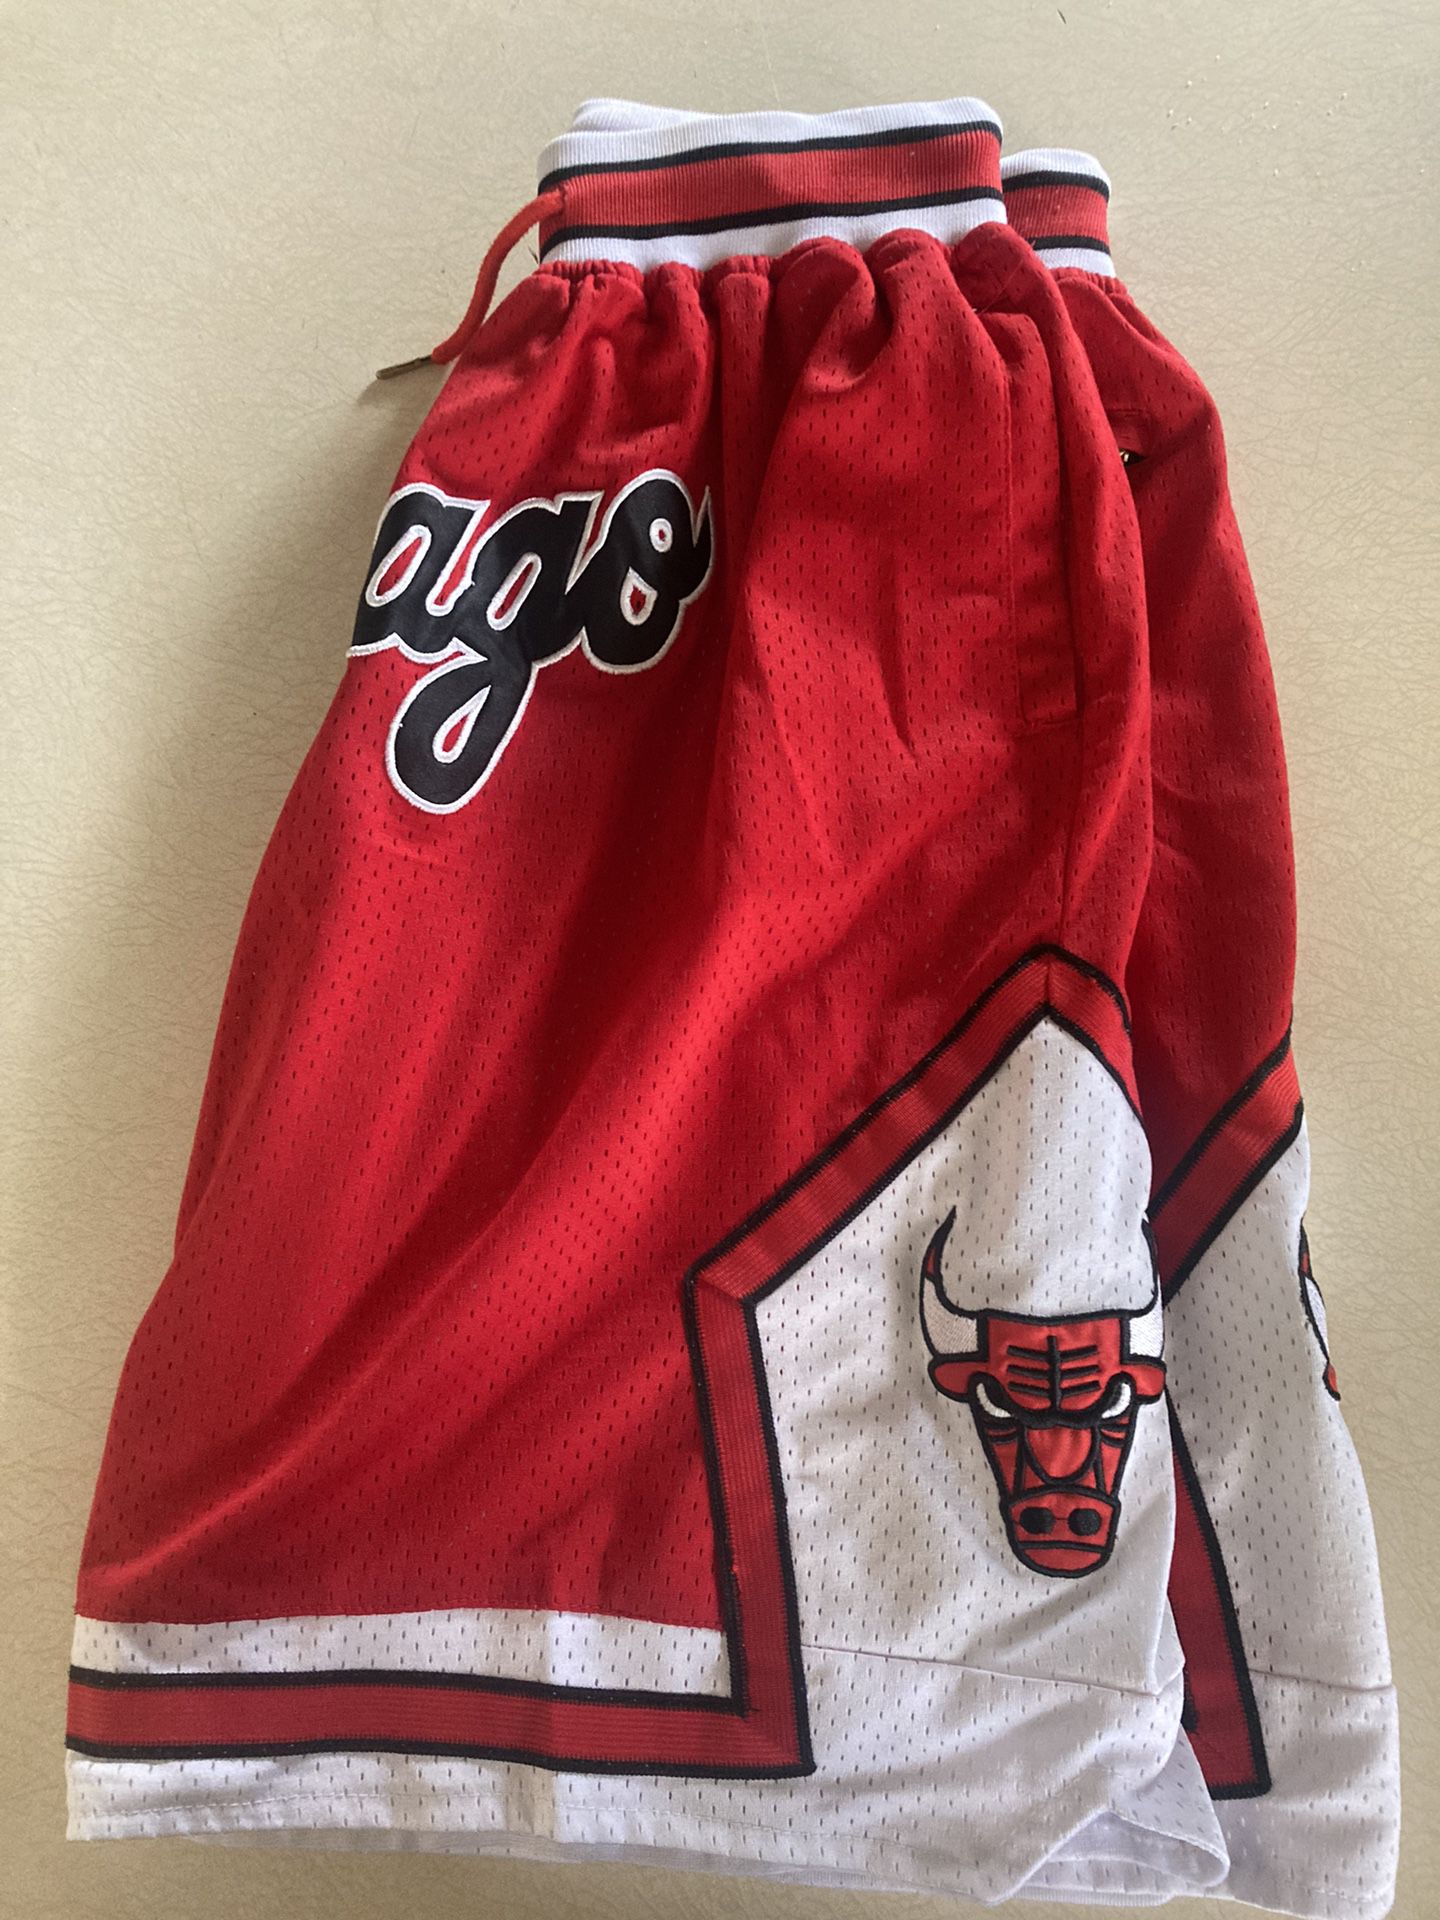 Chicago Bulls Hardwood Classics Reload Swingman Shorts for Sale in Chino,  CA - OfferUp